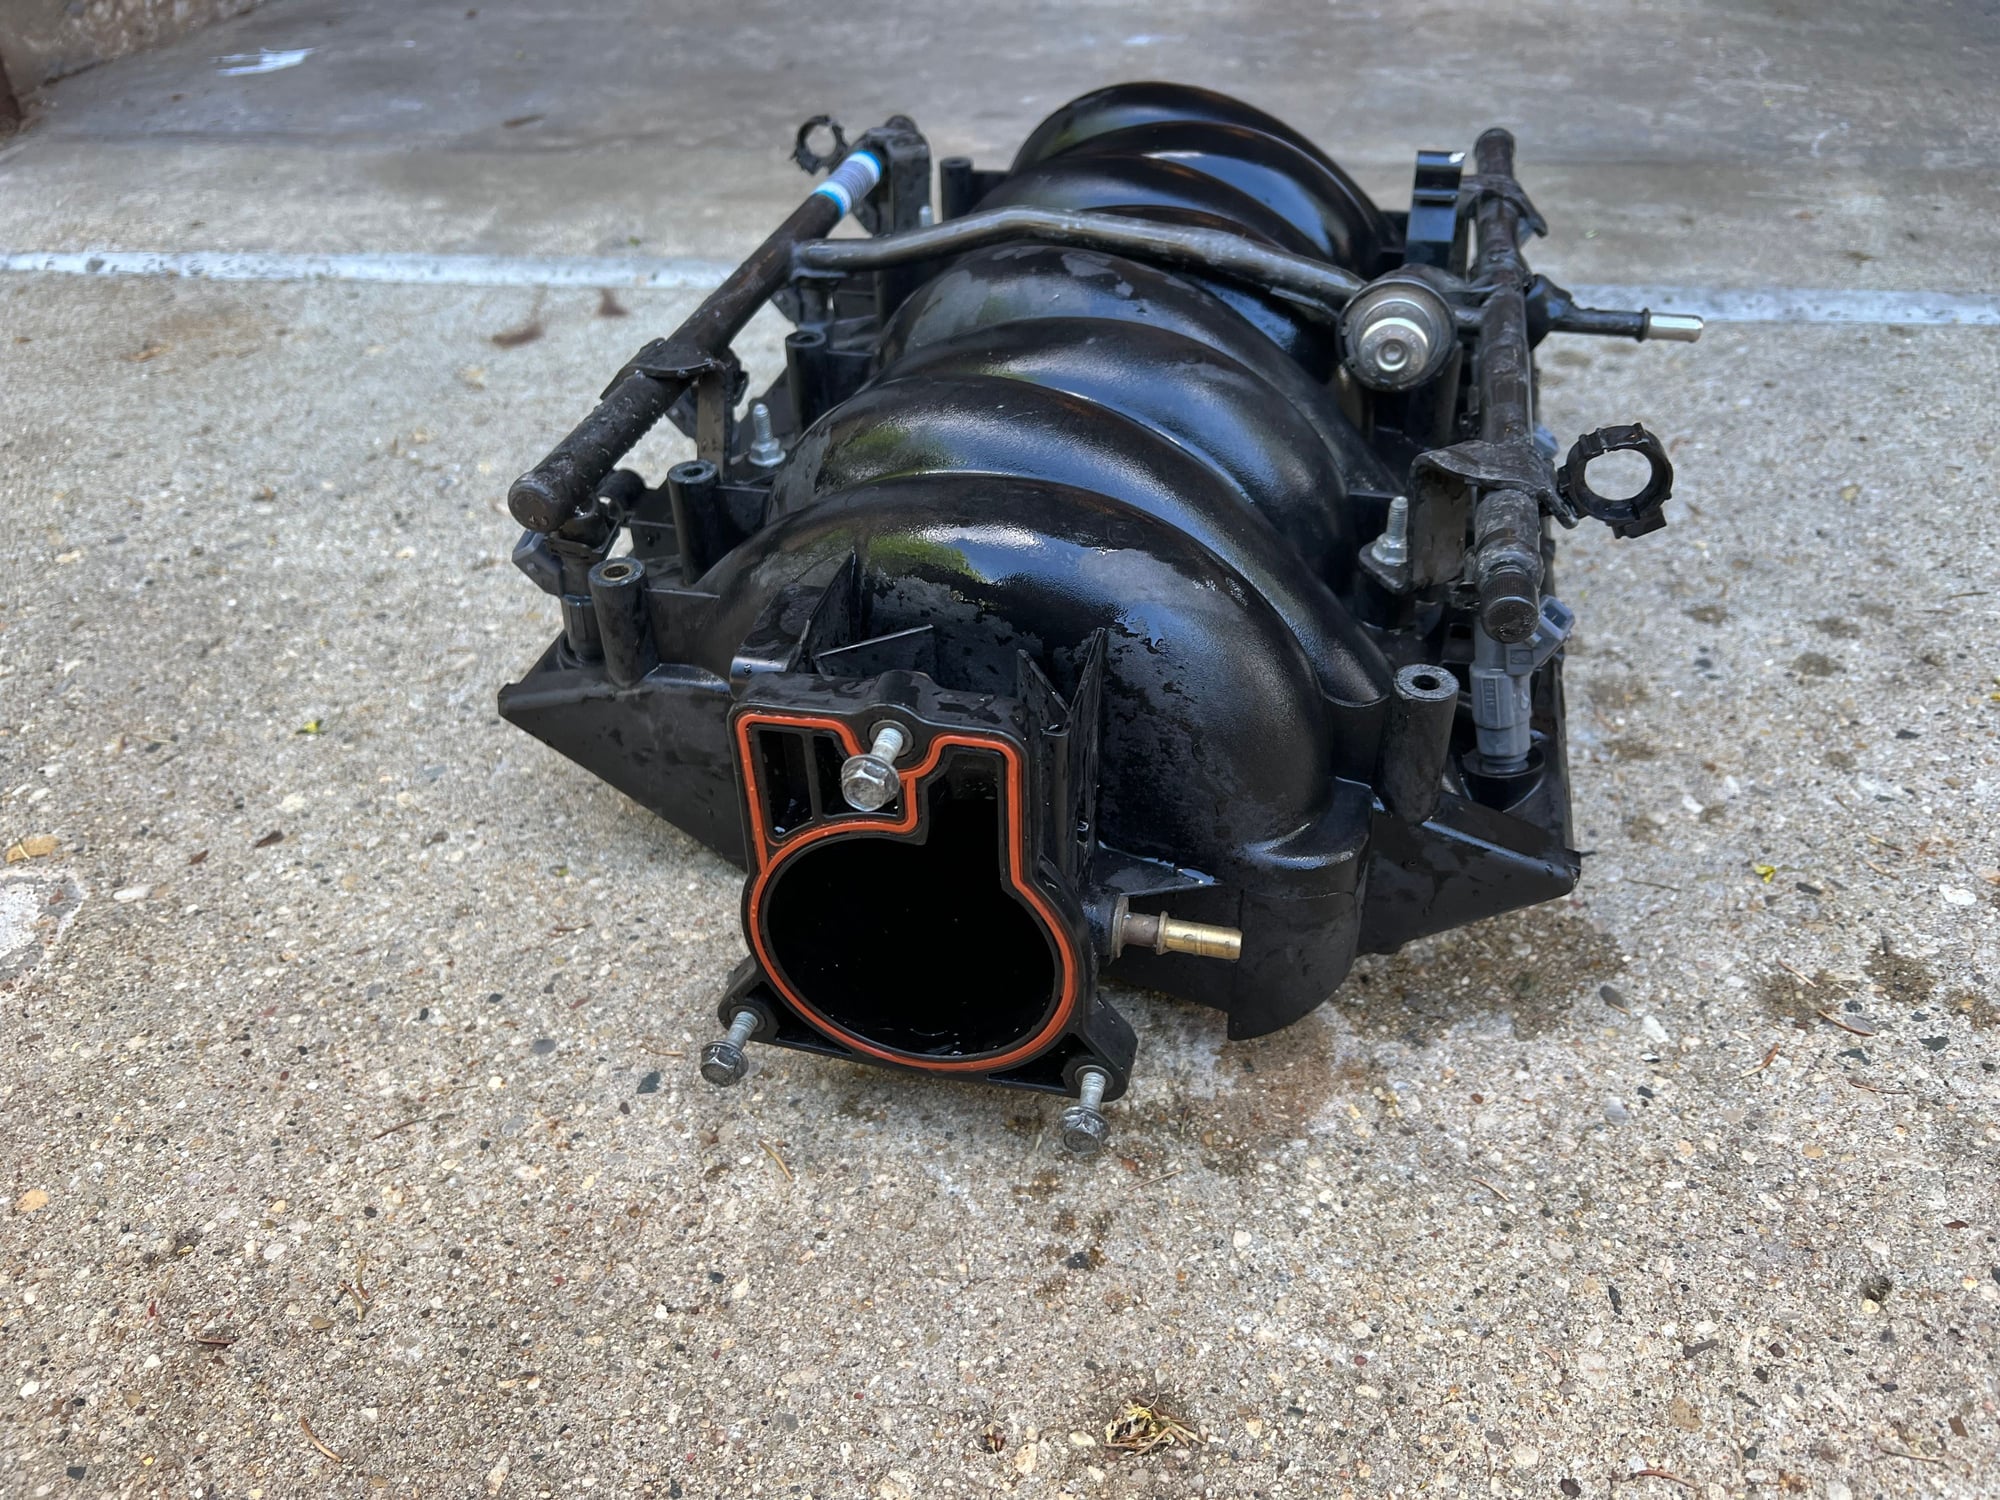 Engine - Intake/Fuel - Ls6 intake with fuel rail and injectors - Used - 0  All Models - Elgin, IL 60120, United States